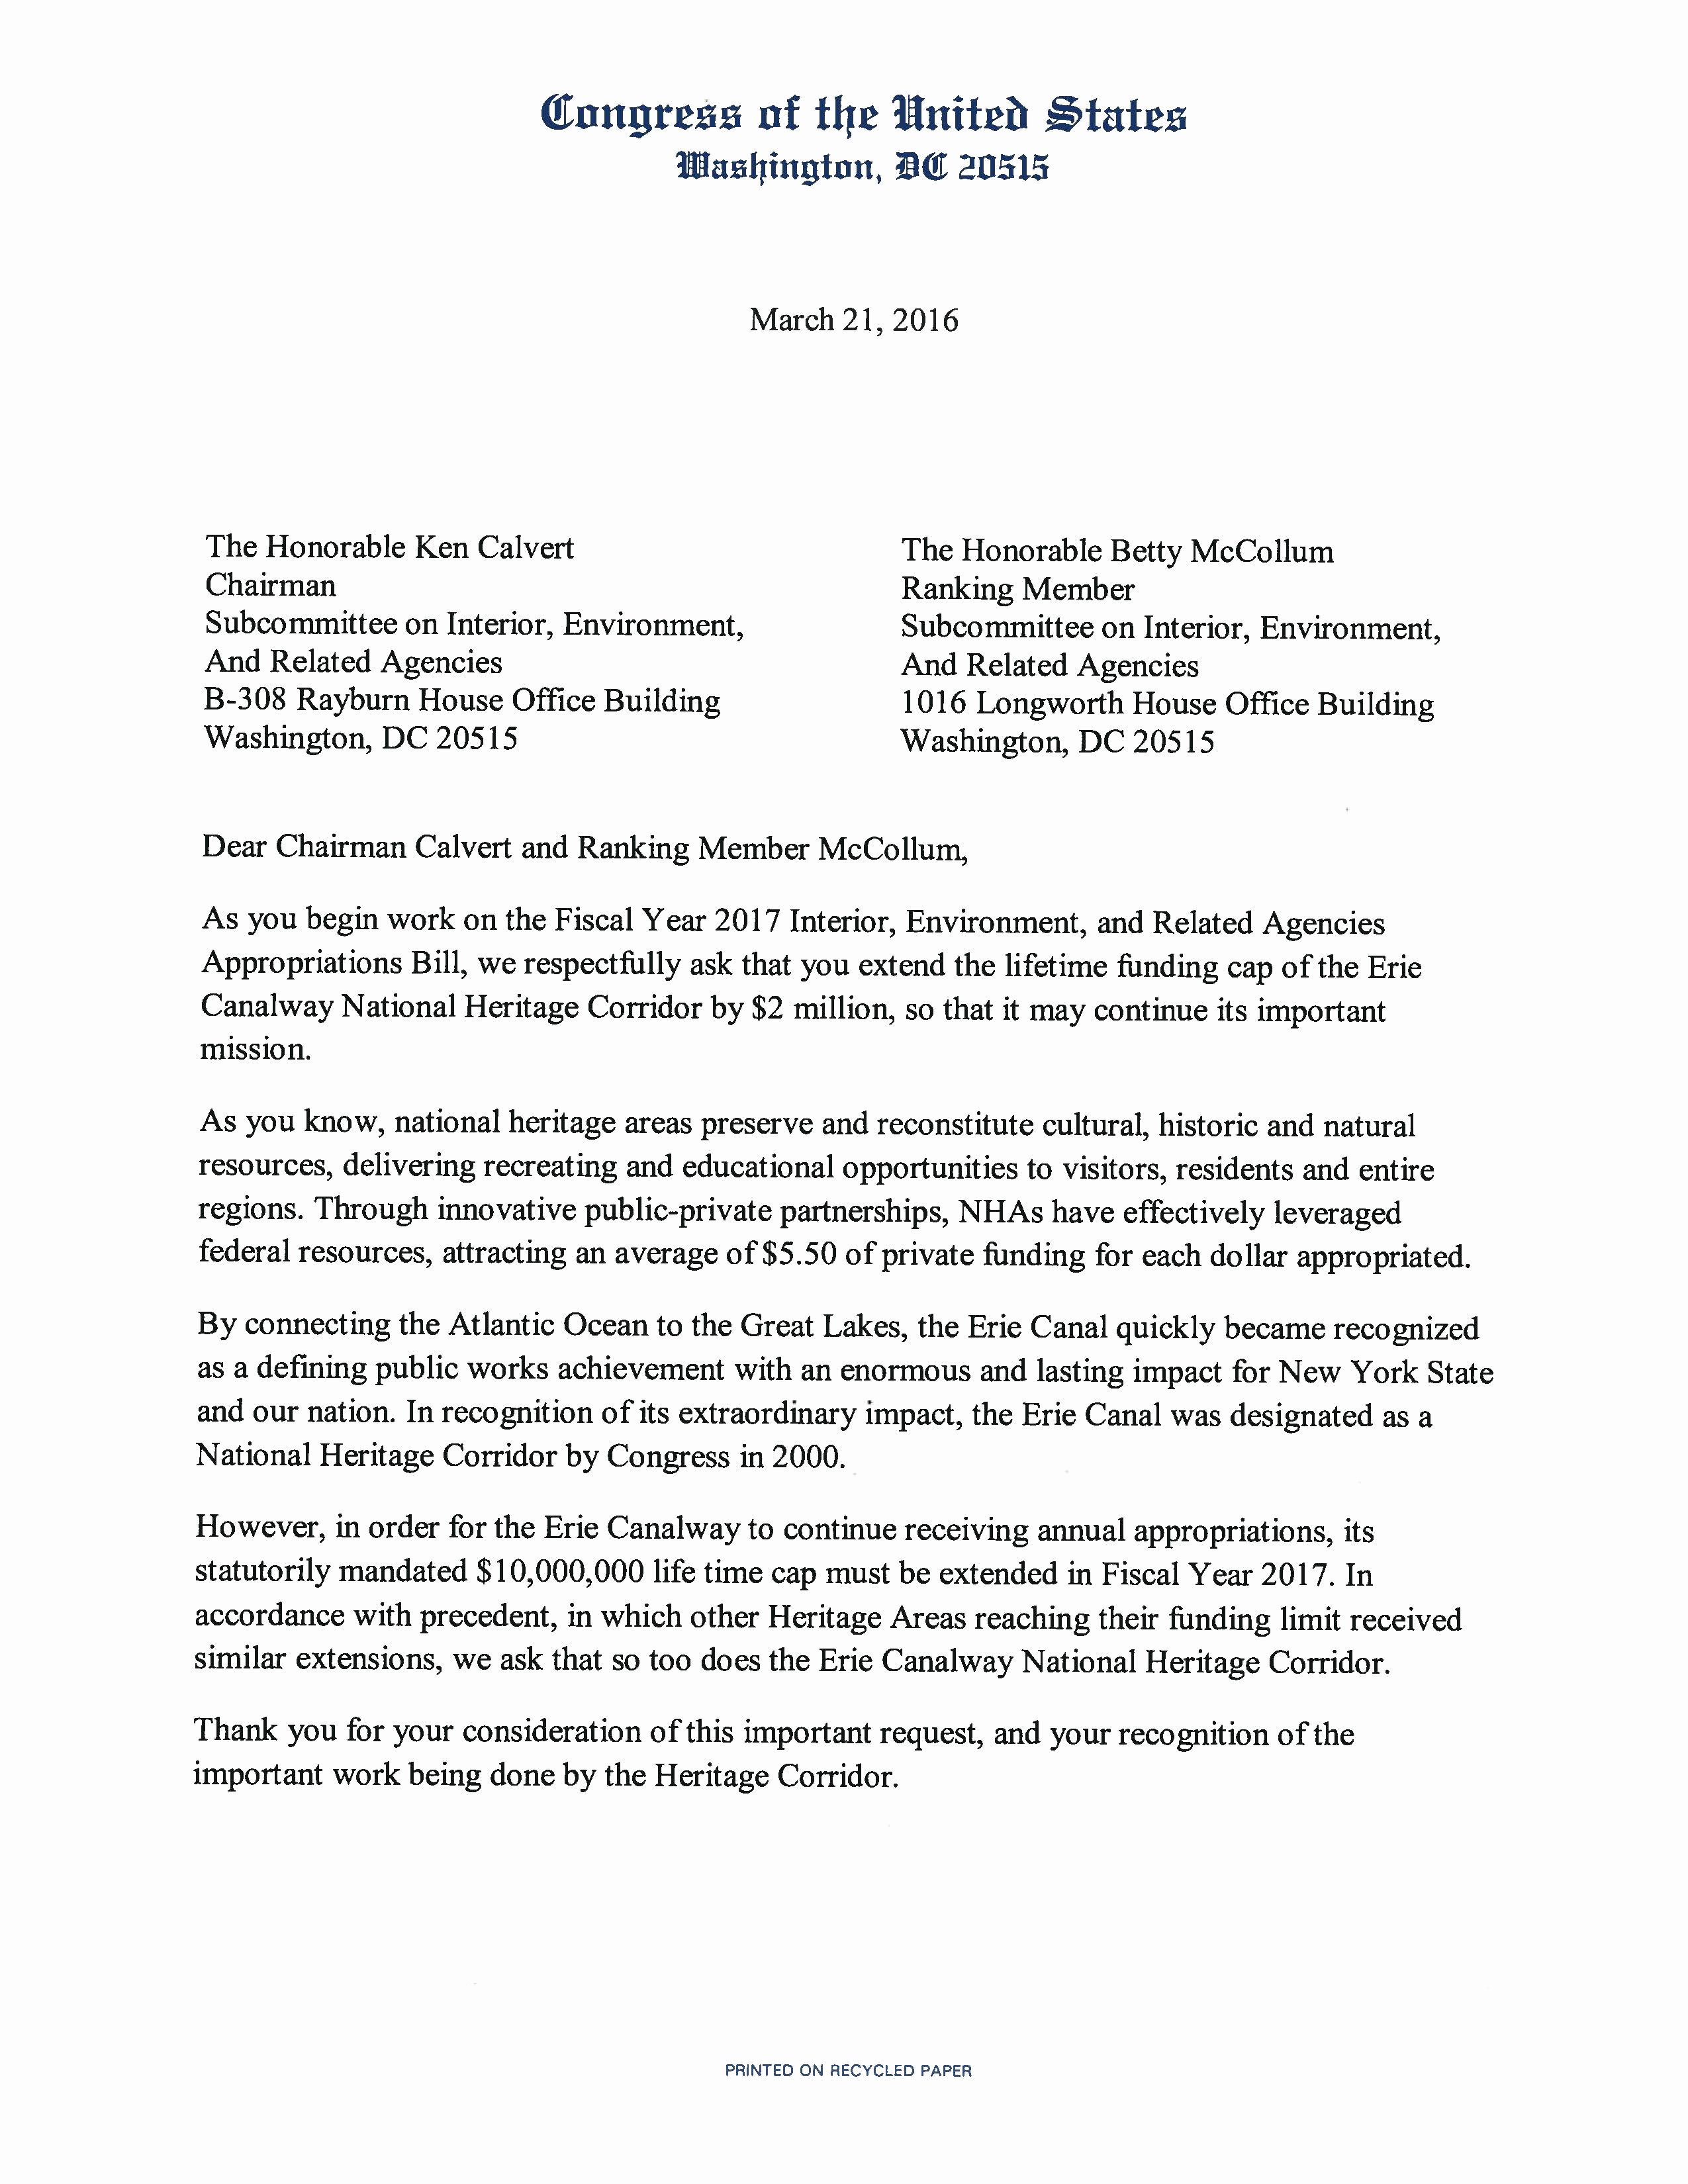 Request for Funds Letter Luxury Congressman Higgins Letter Requesting Funding for Erie